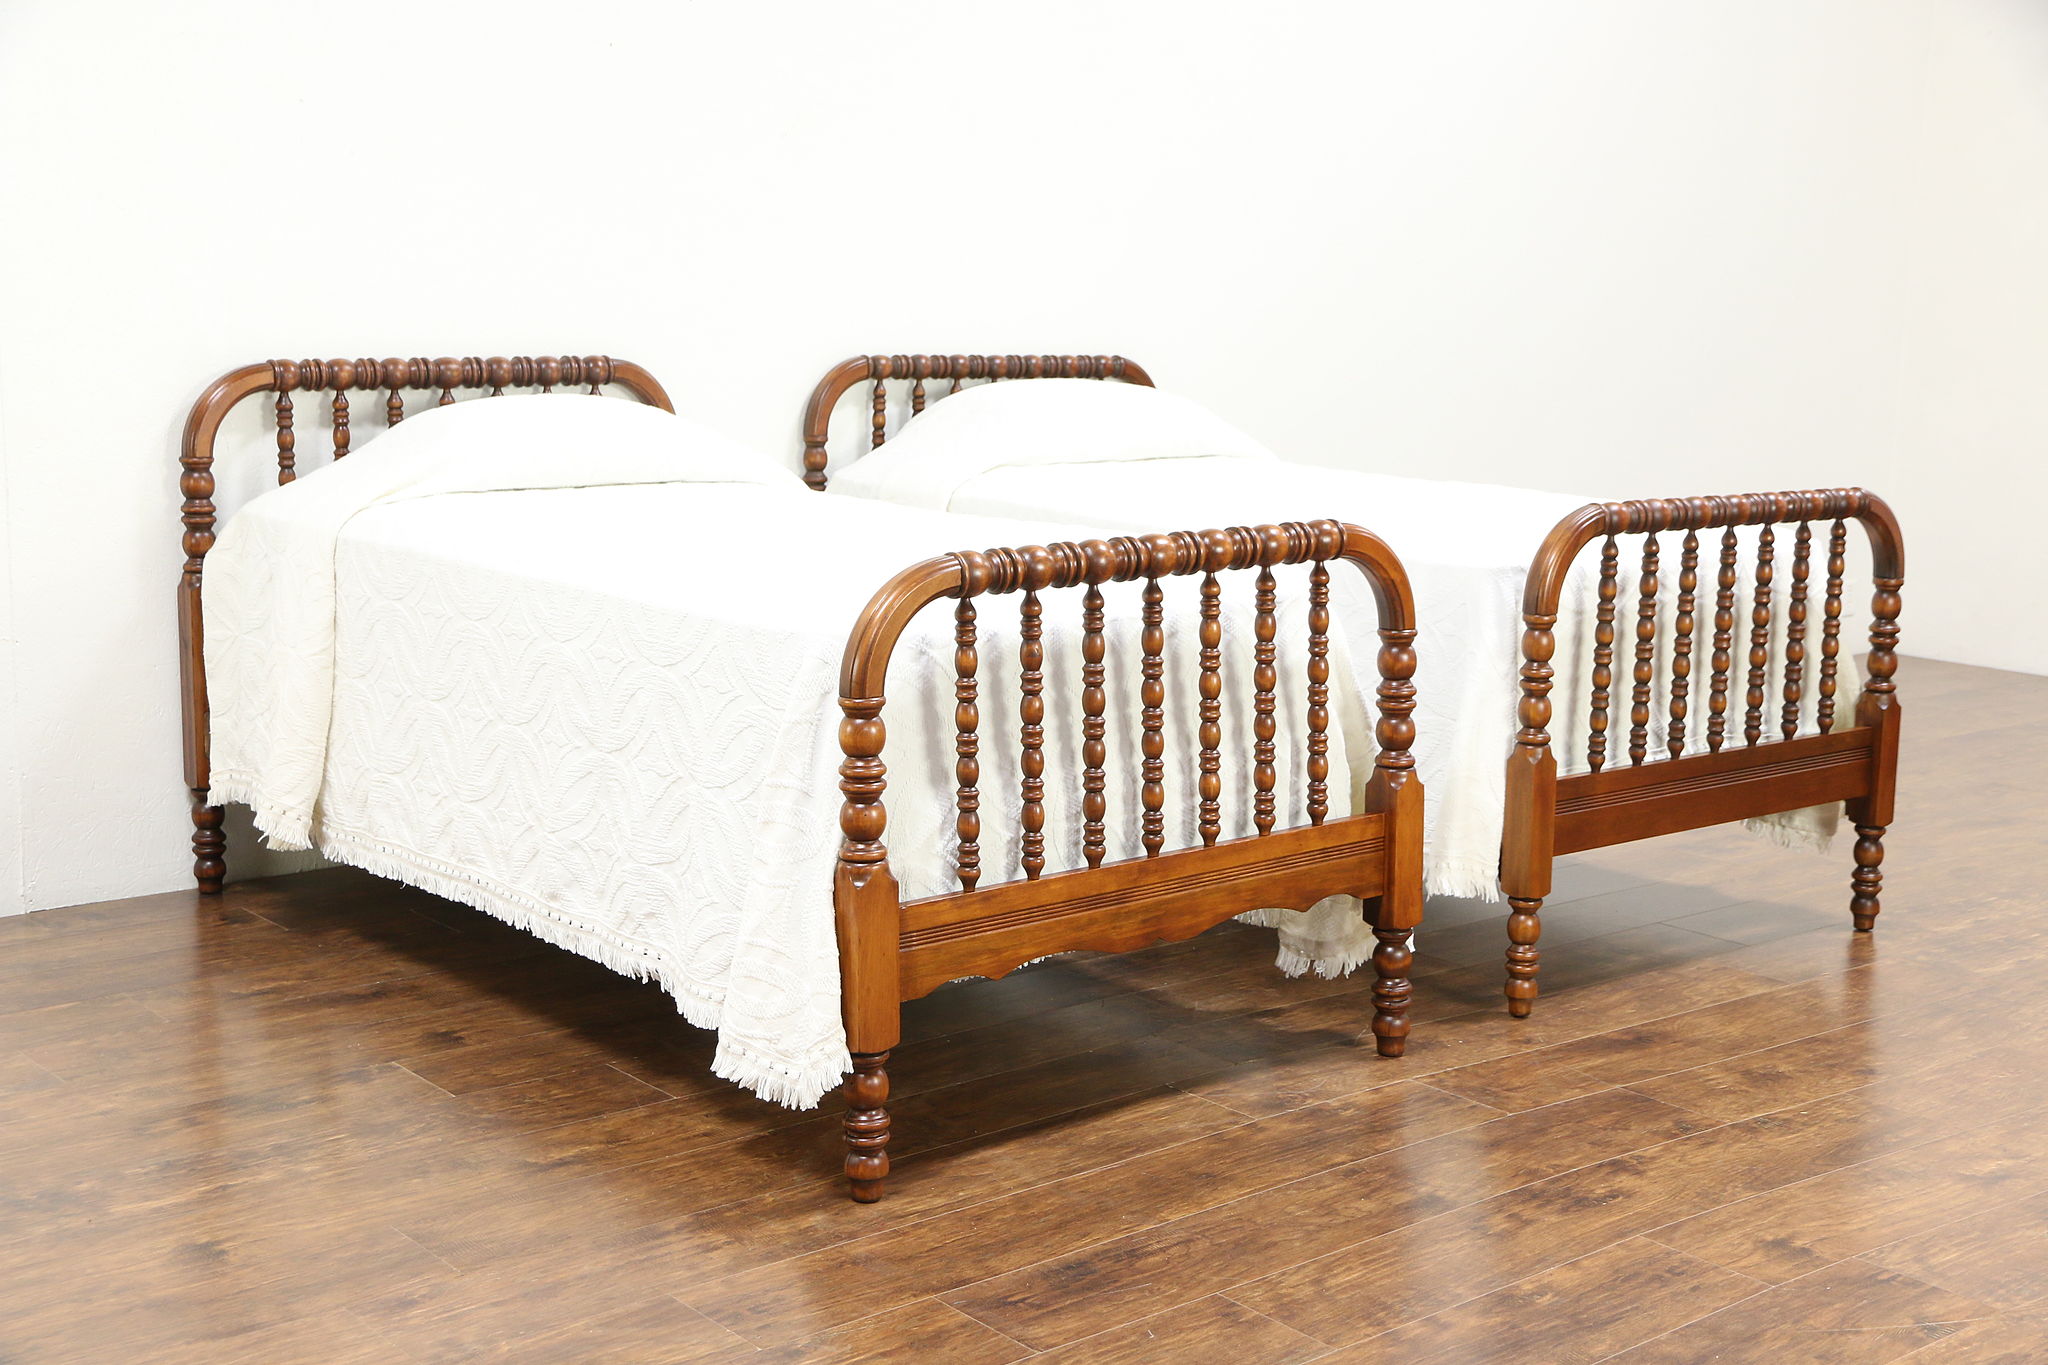 Single Maple Spool Beds, Maple Wood Twin Bed